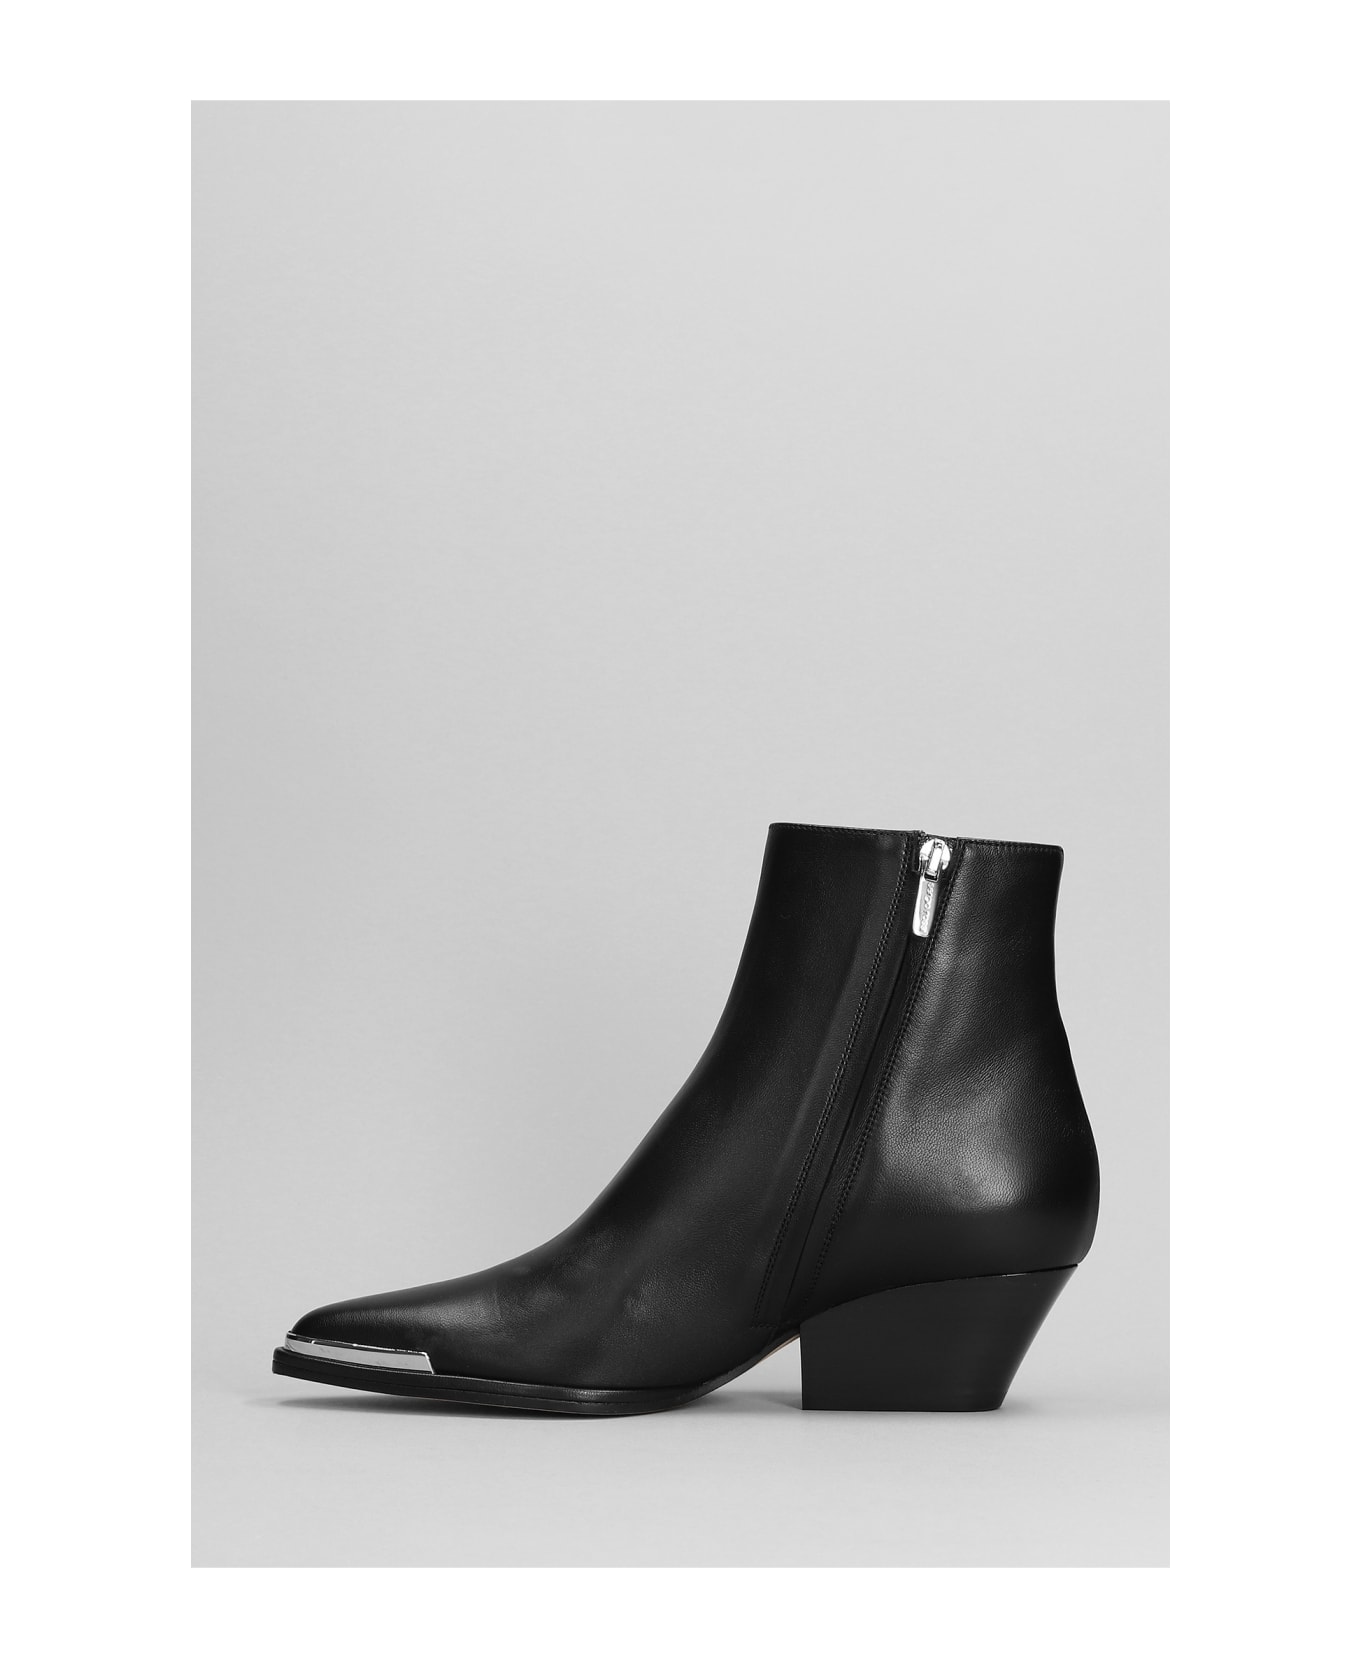 Sergio Rossi High Heels Ankle Boots In Black Leather - black